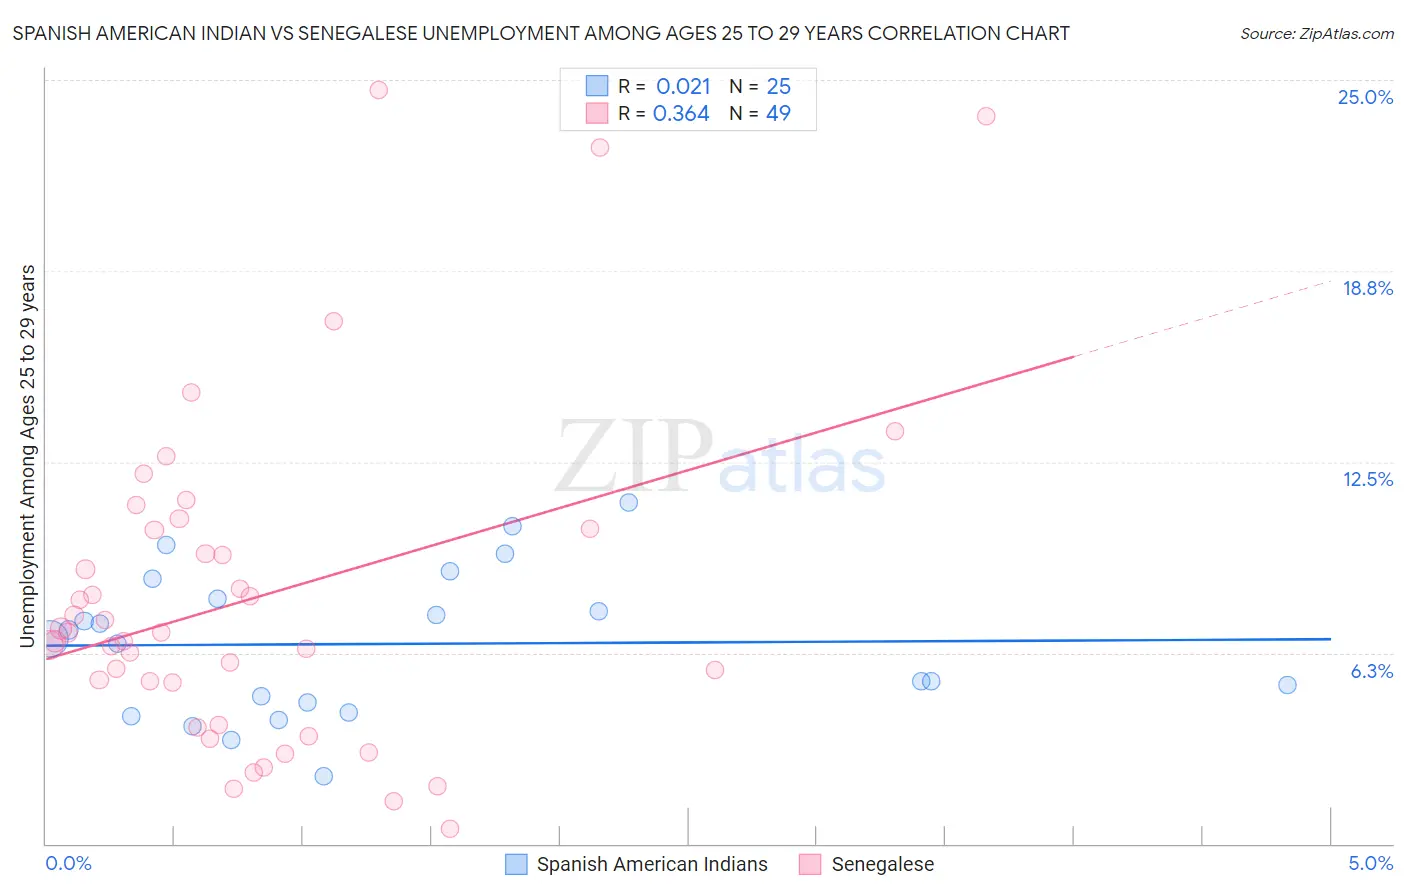 Spanish American Indian vs Senegalese Unemployment Among Ages 25 to 29 years